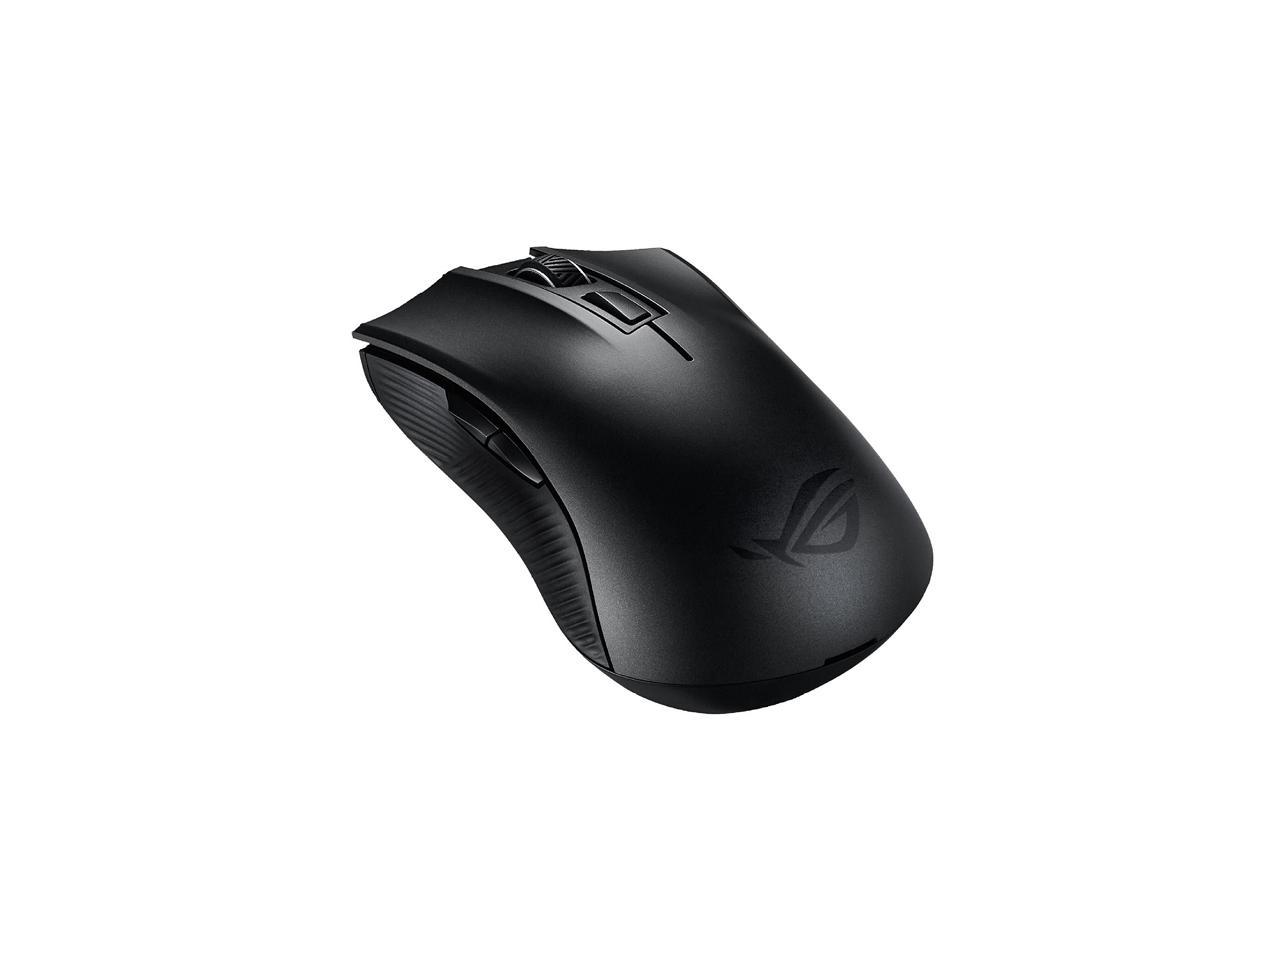 Asus P508 Rog Strix Carry Rog Strix Carry Gaming Mouse With Pixart3330 Optical S Ebay